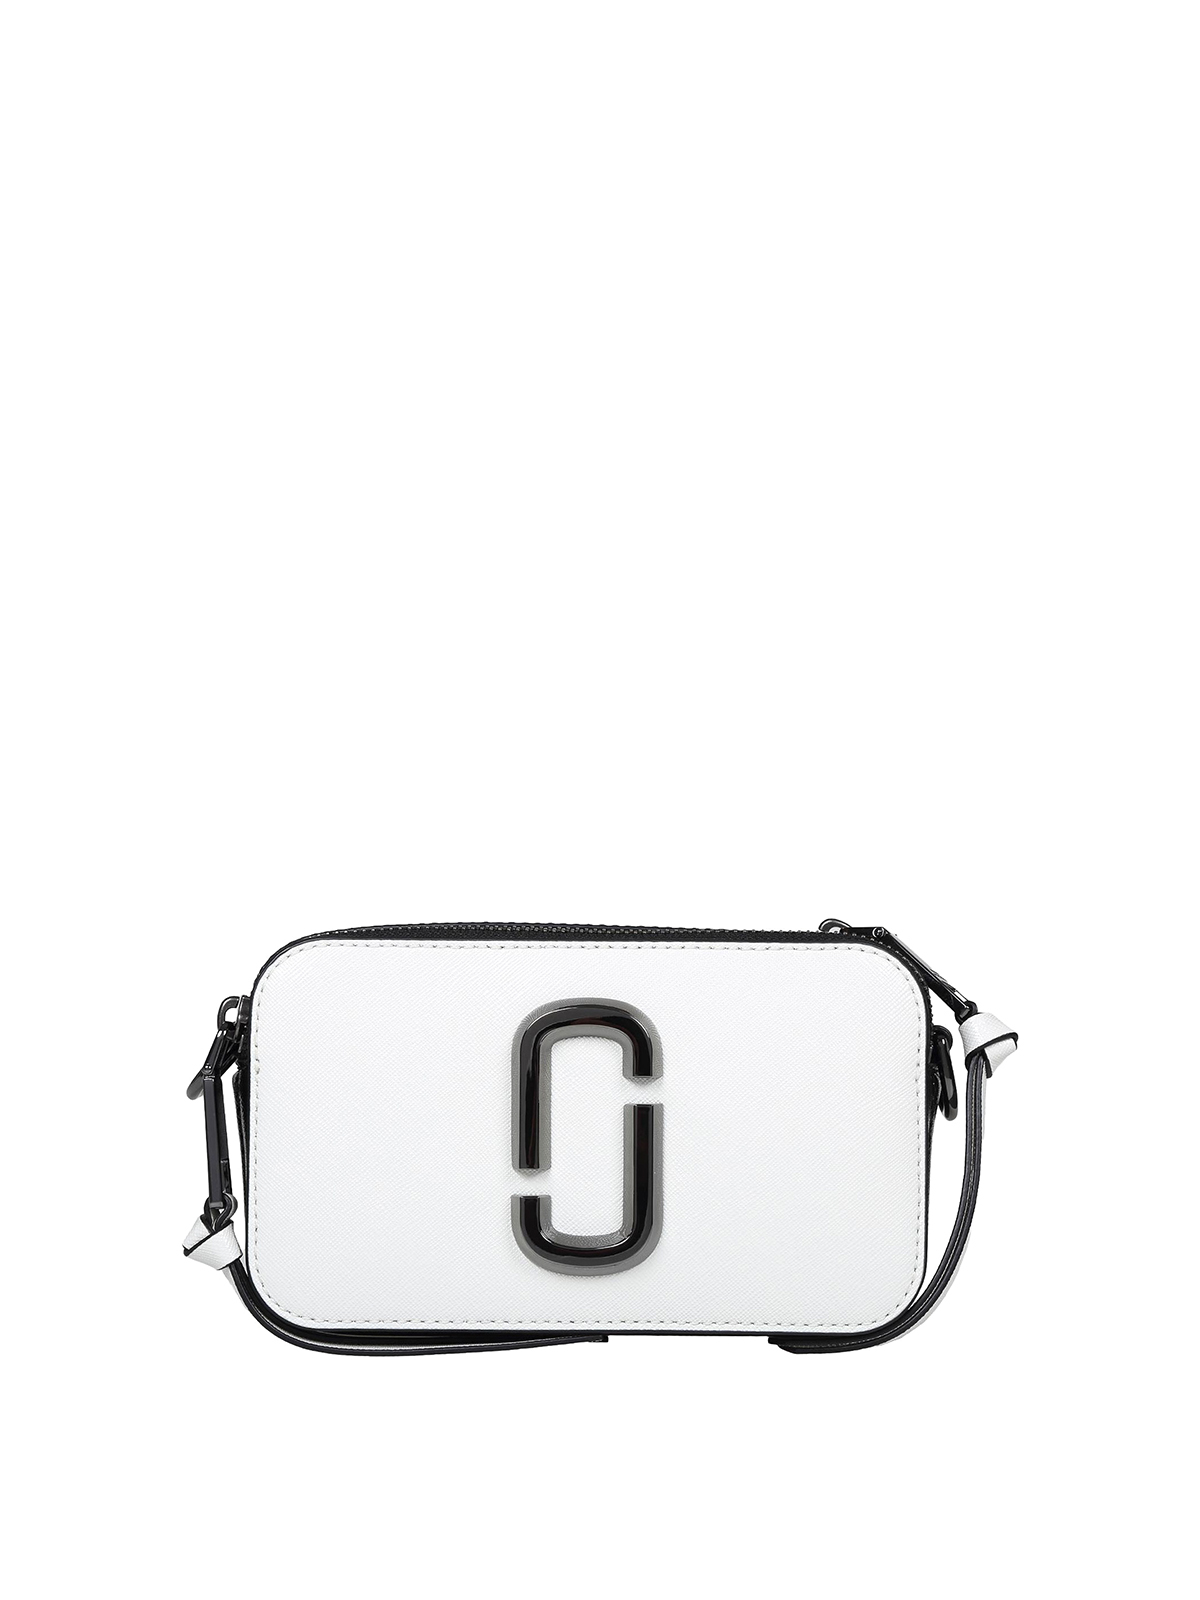 The Snapshot of Marc Jacobs - Black leather rectangular bag with